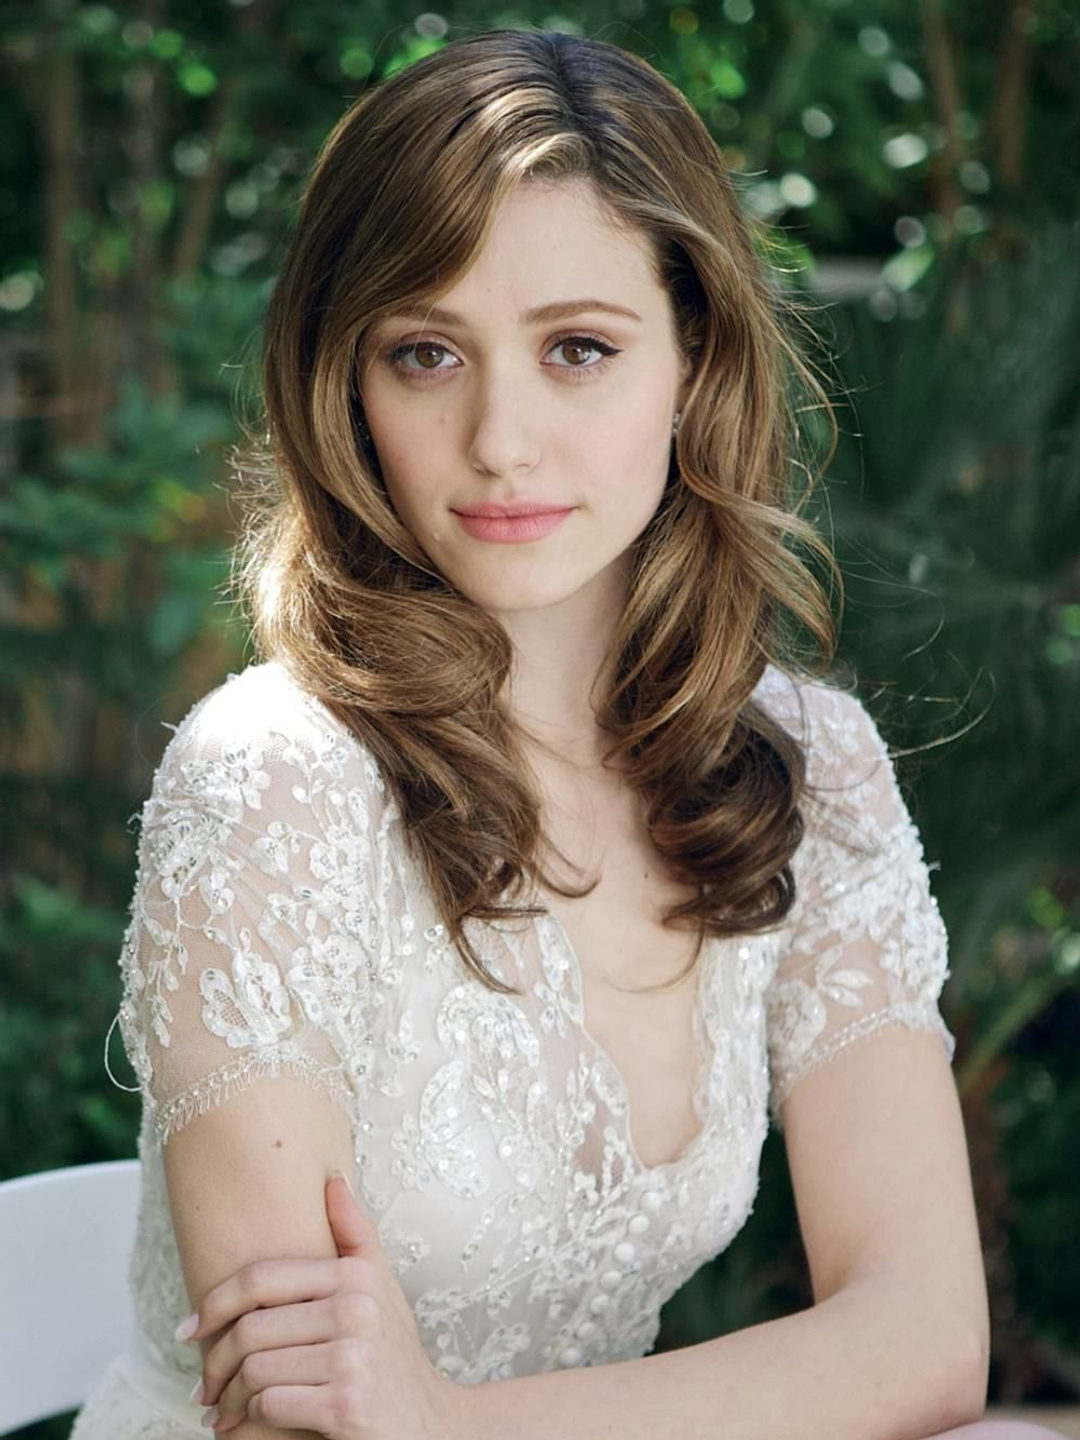 Emmy Rossum where is she now